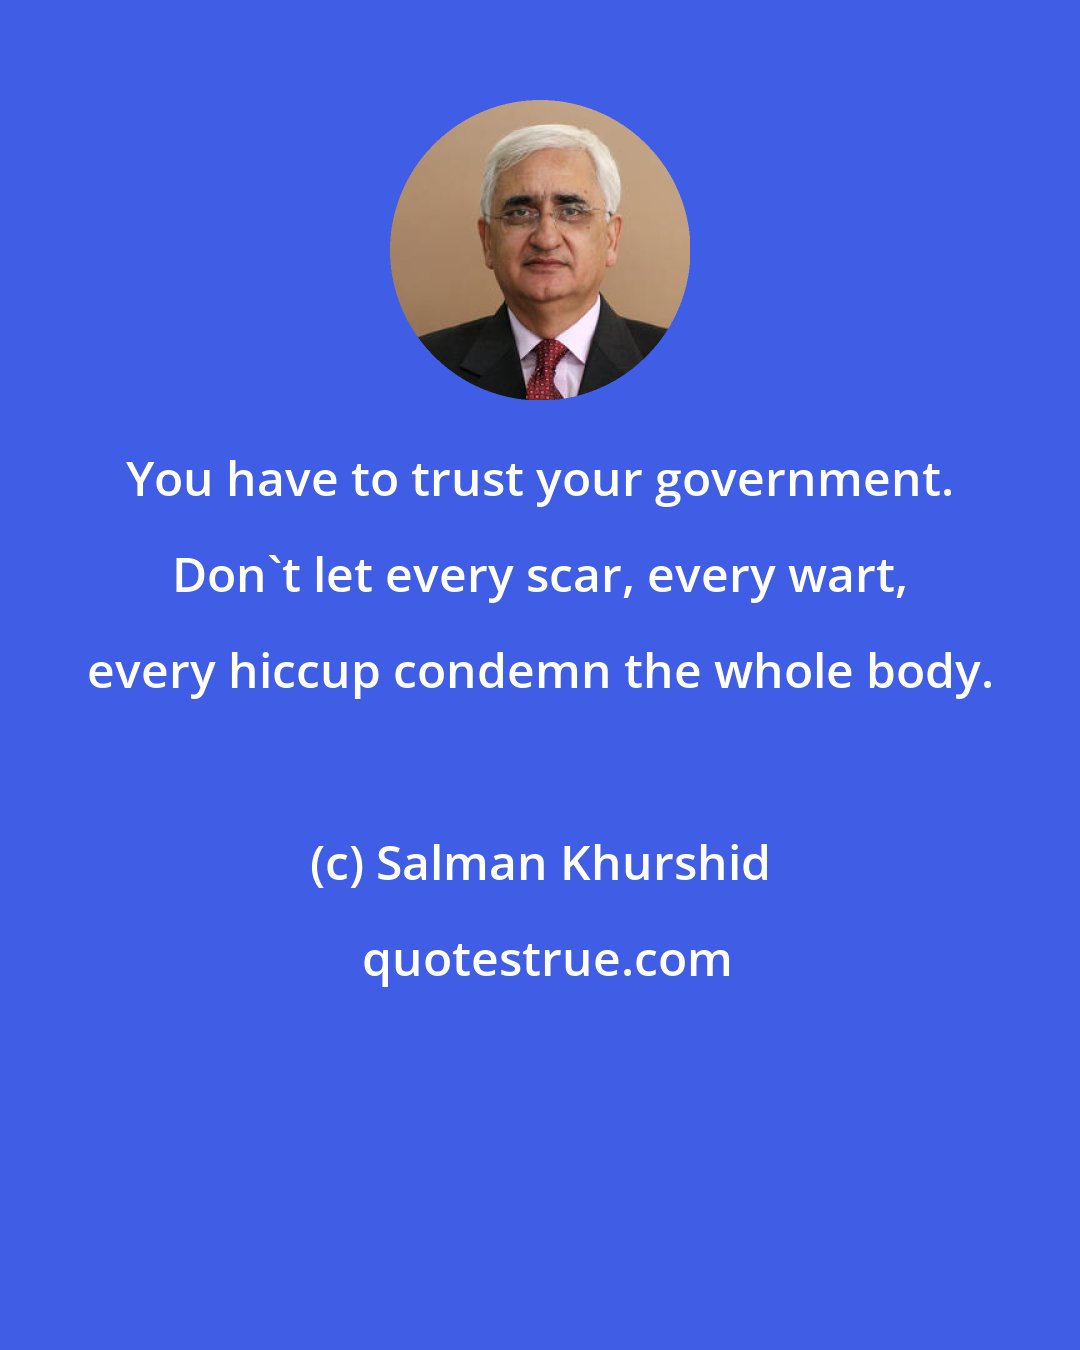 Salman Khurshid: You have to trust your government. Don't let every scar, every wart, every hiccup condemn the whole body.